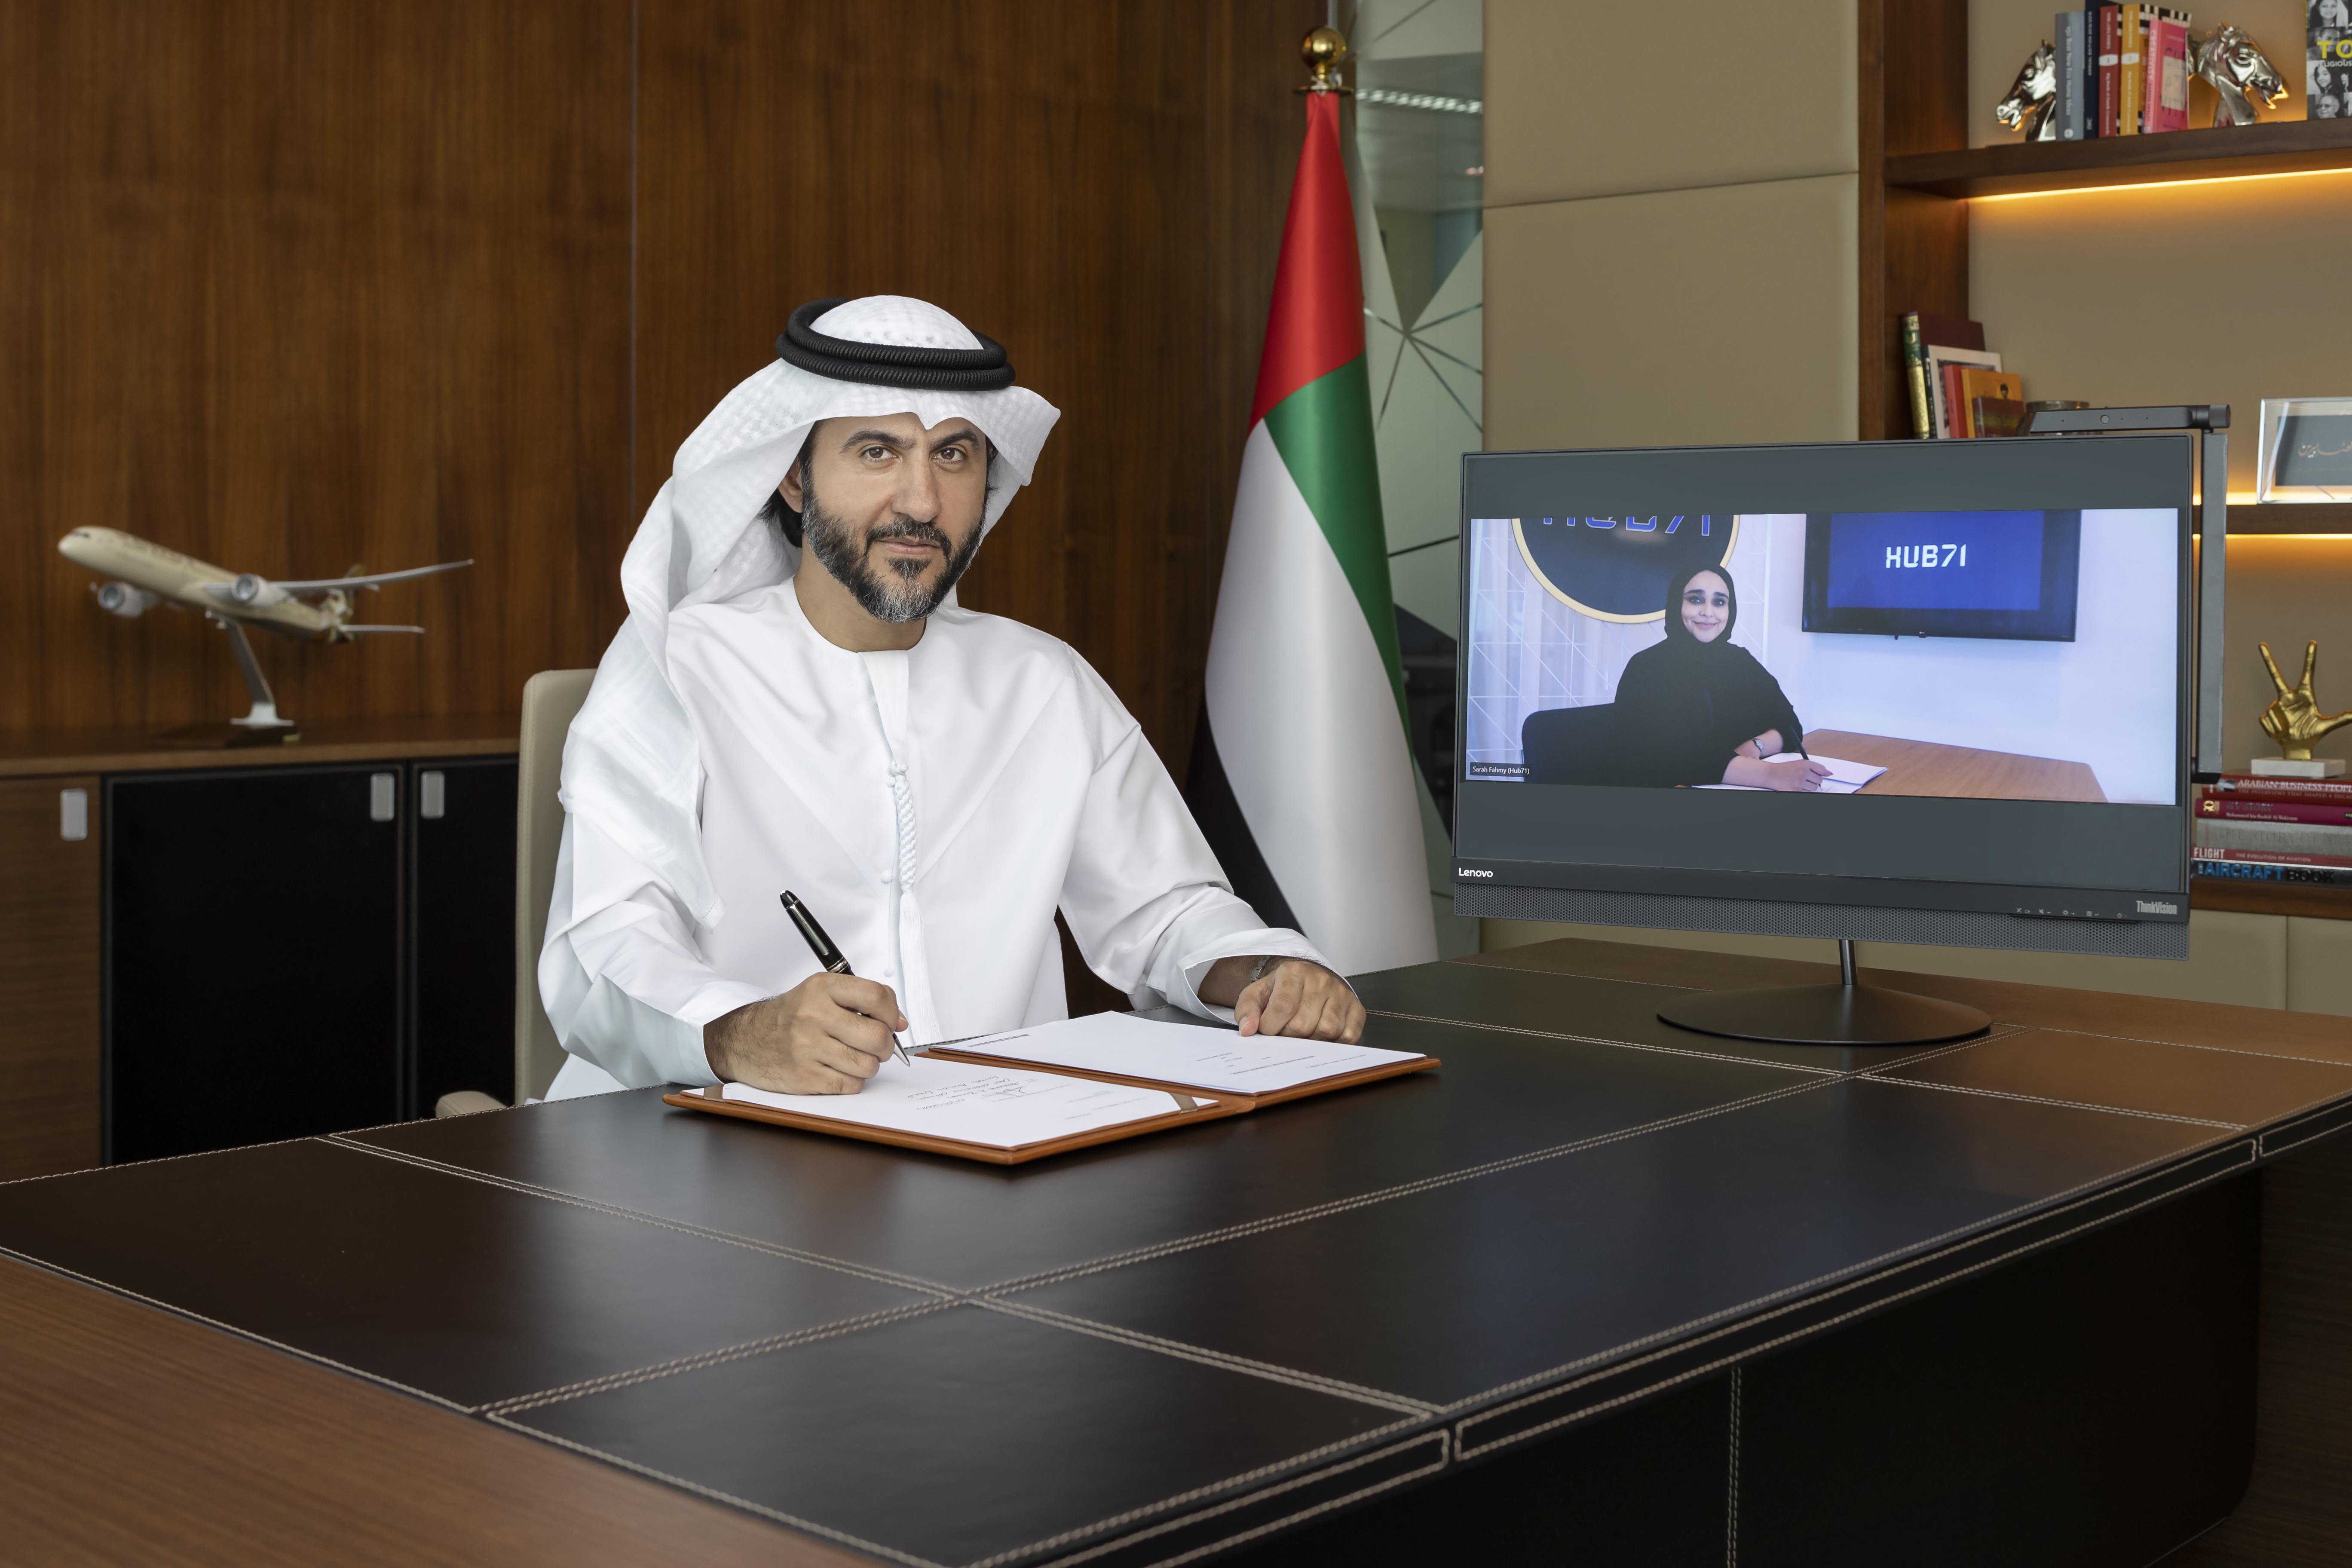 Etihad Airways And Hub71 Sign MOU To Boost Global Tech Ecosystem In Abu Dhabi